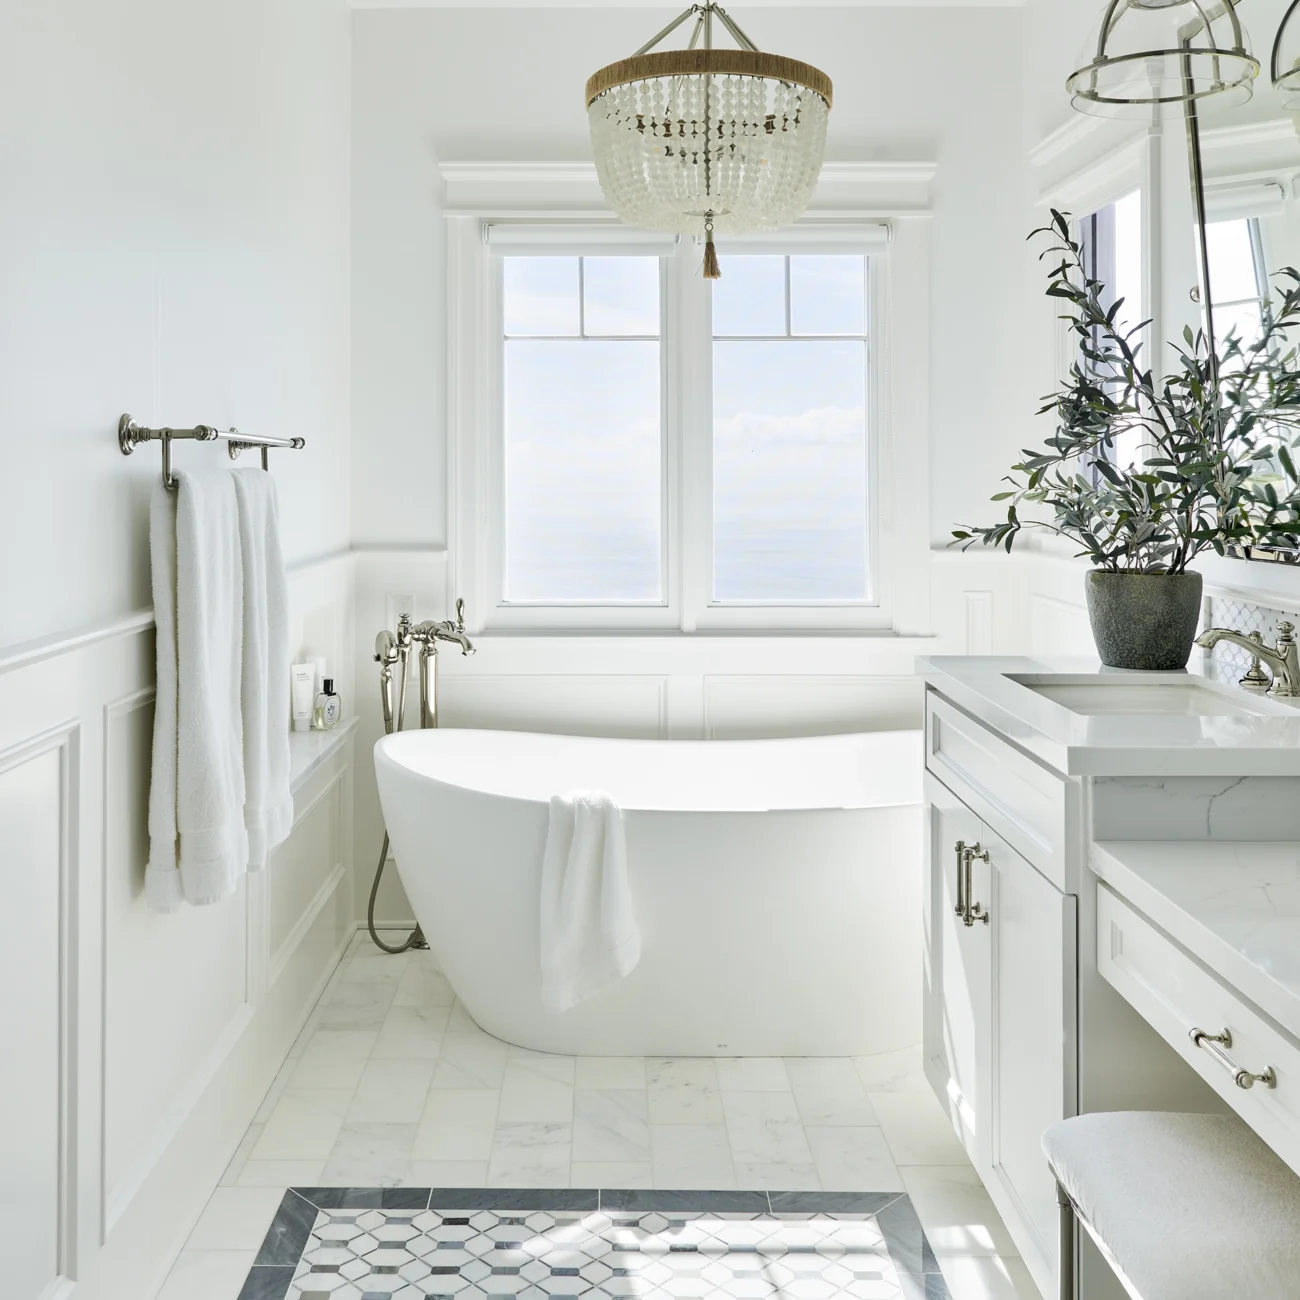 Christine Vroom Interiors Vigilance | Bright white marble bathroom with soaker tub, make-up vanity and chandelier